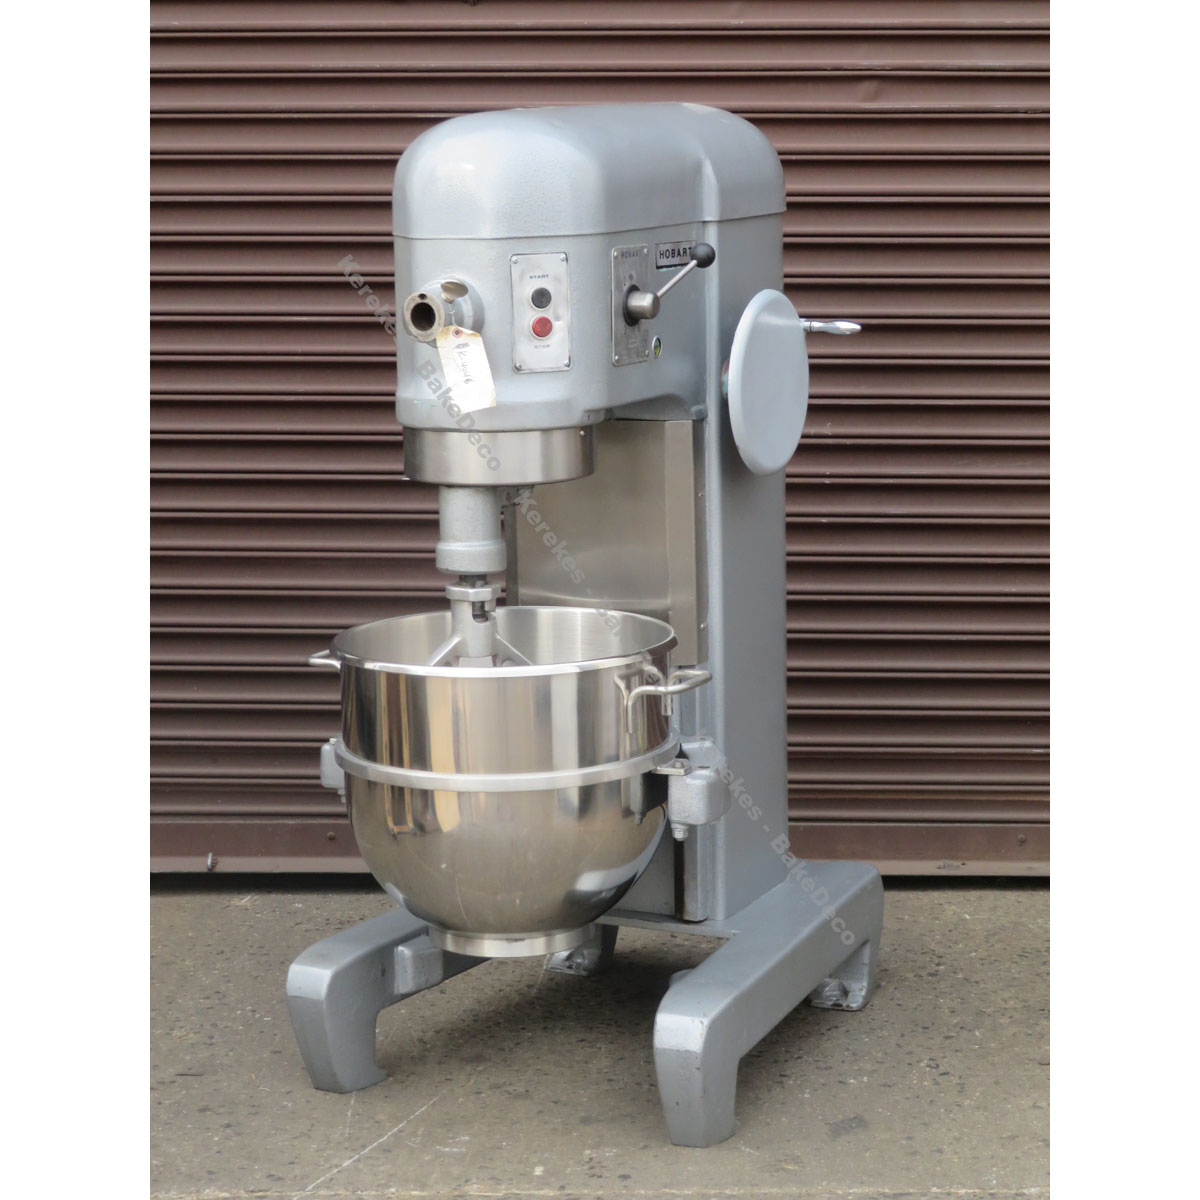 Hobart 60 Quart H600 Mixer, Used Great Condition